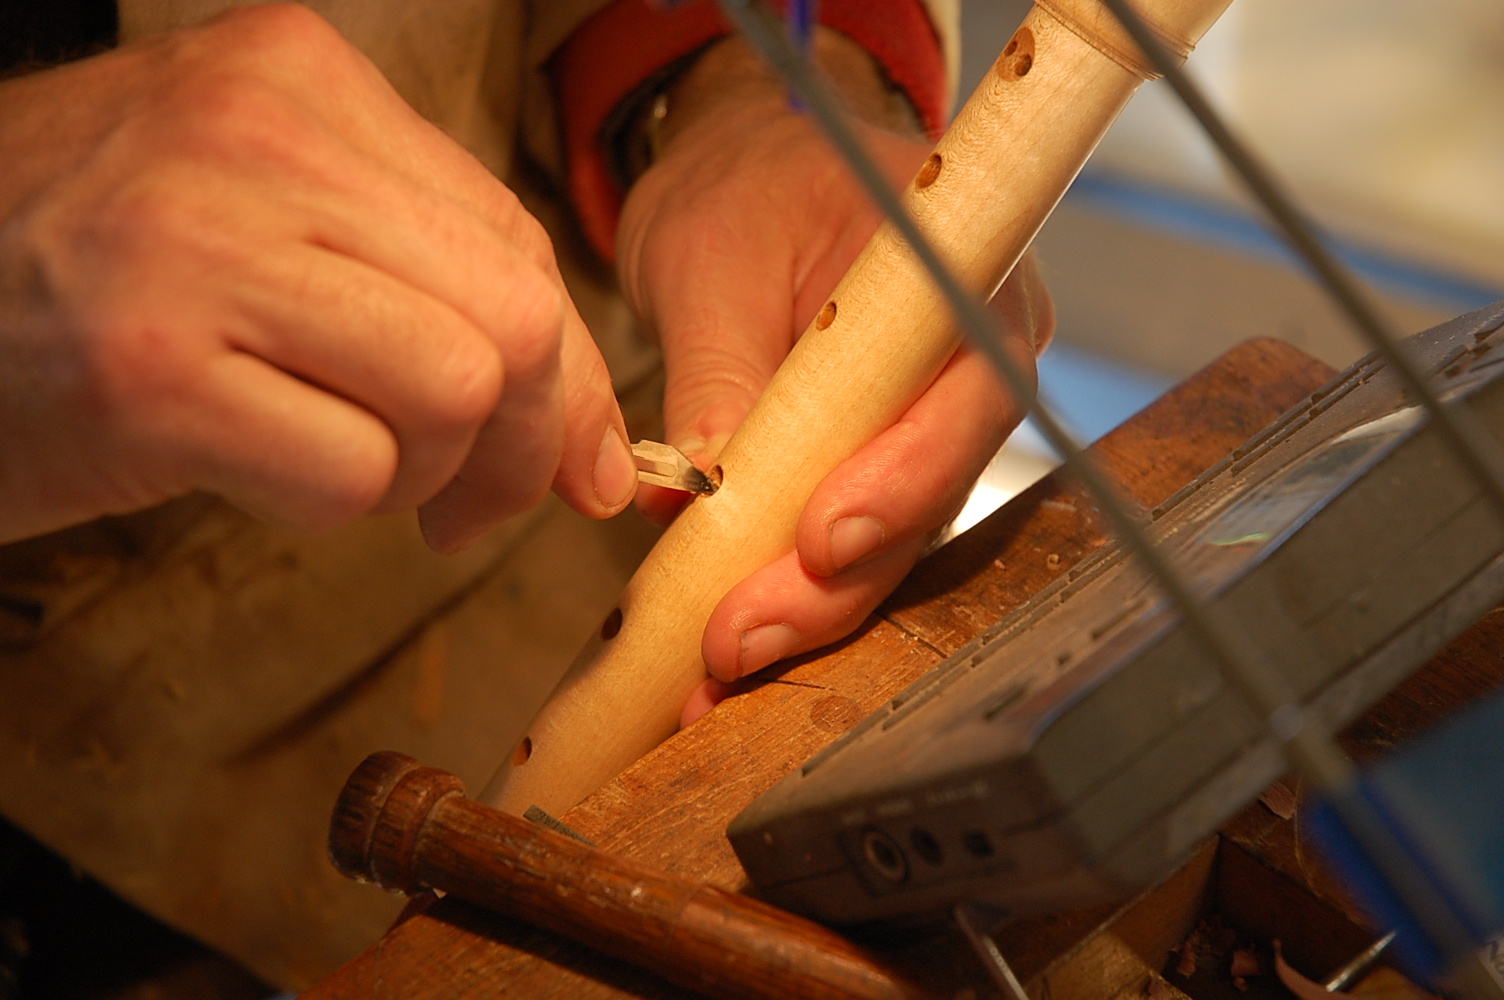 Tim carefully inserts a scalpel blade into a finger hole, and scrapes away wood.